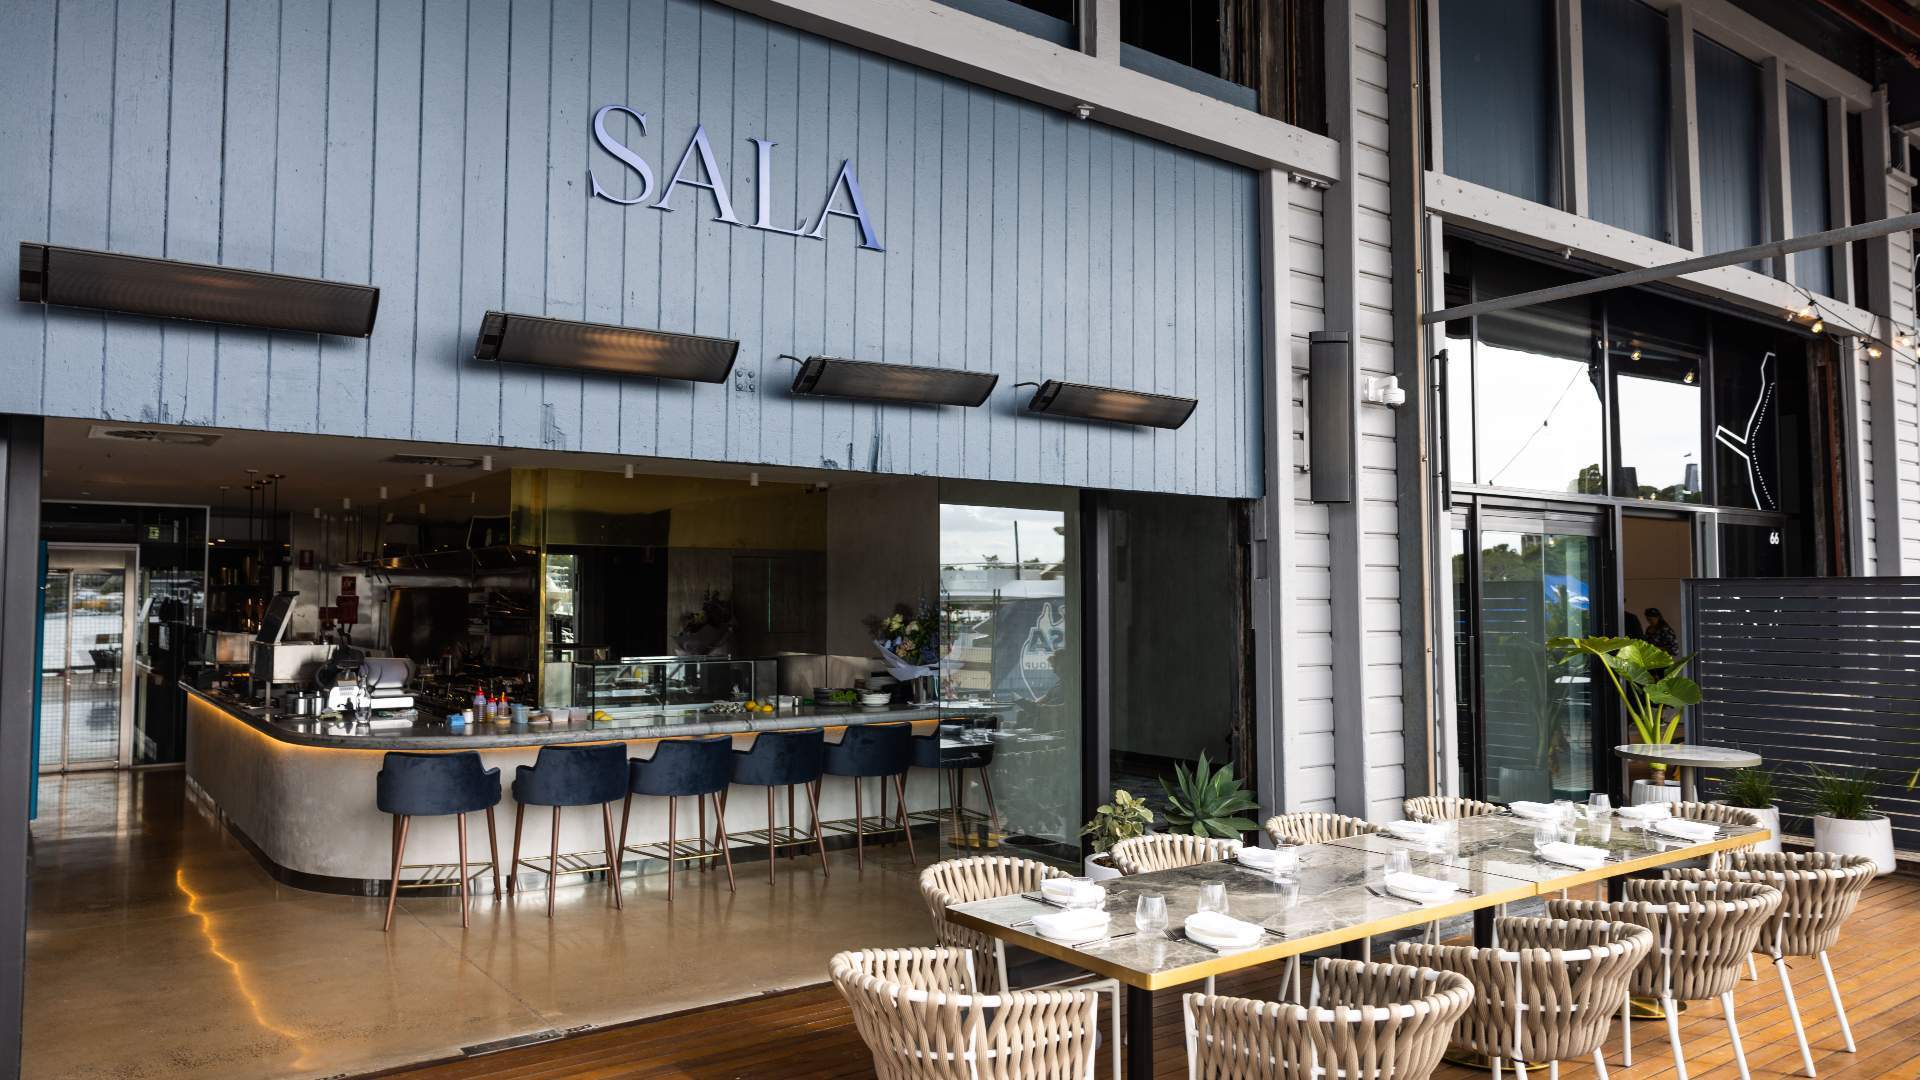 The outdoor tables at Sala - one of the best seafood restaurants in Sydney.